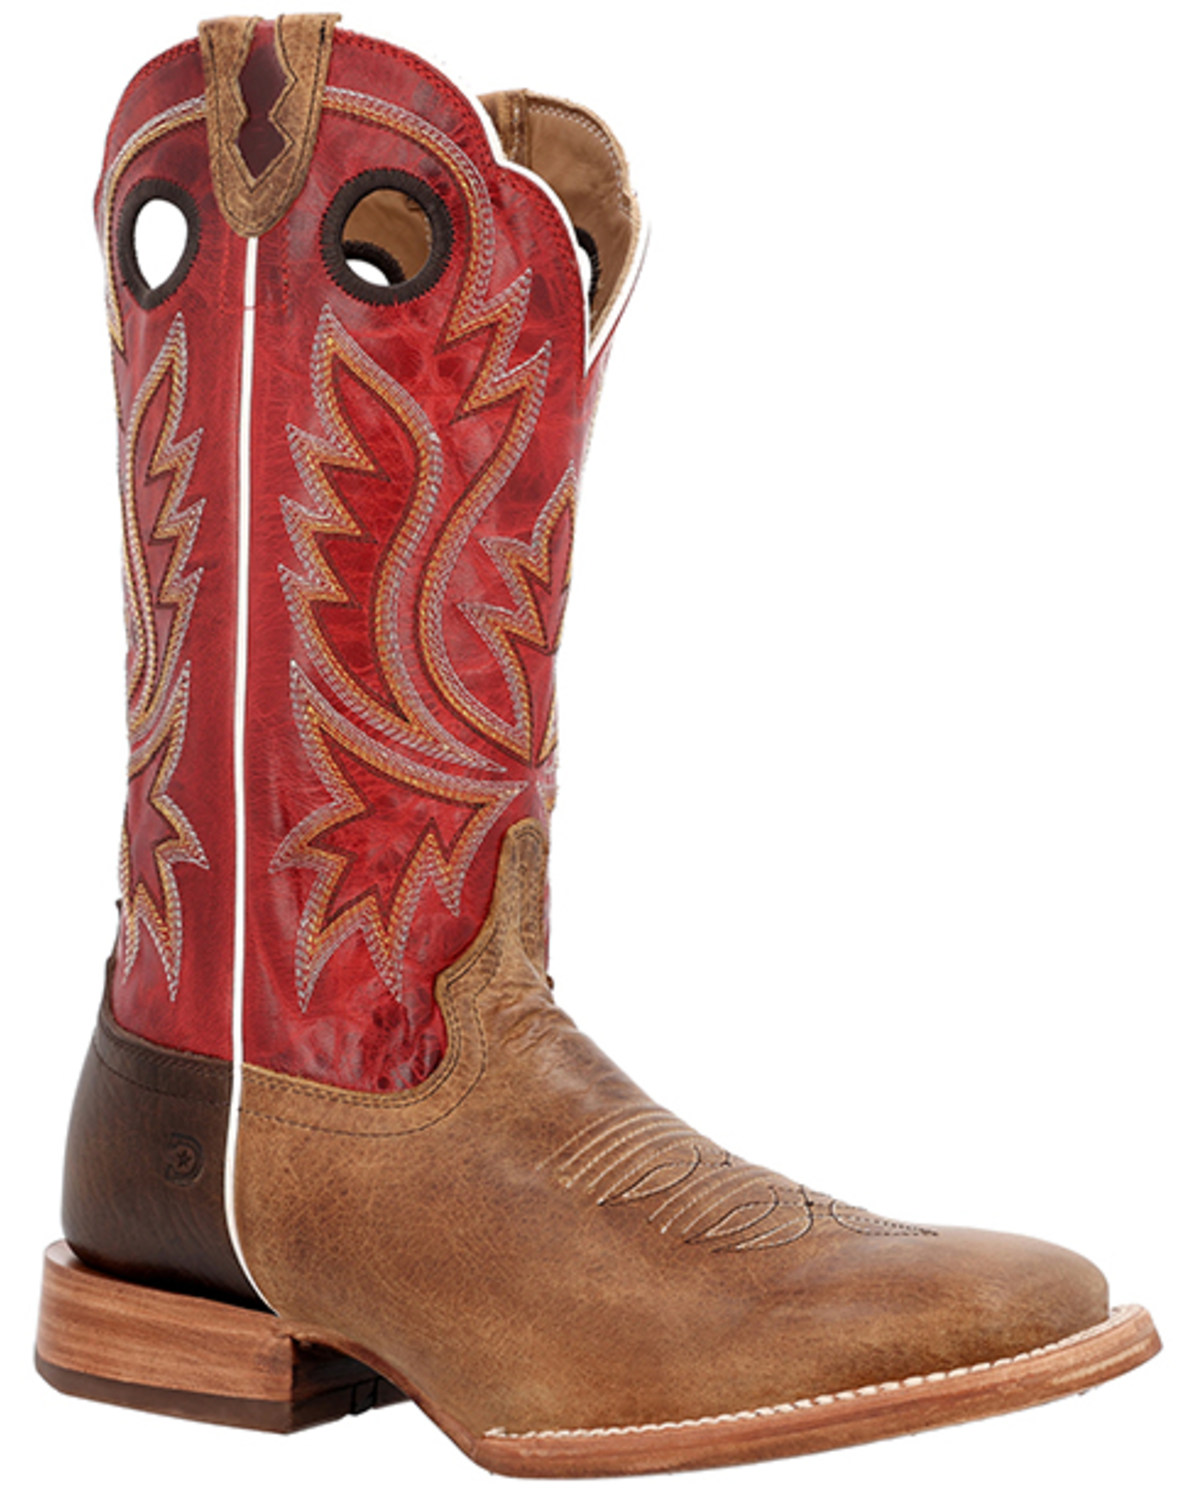 Durango Men's PRCA Collection Bison Western Boots - Broad Square Toe